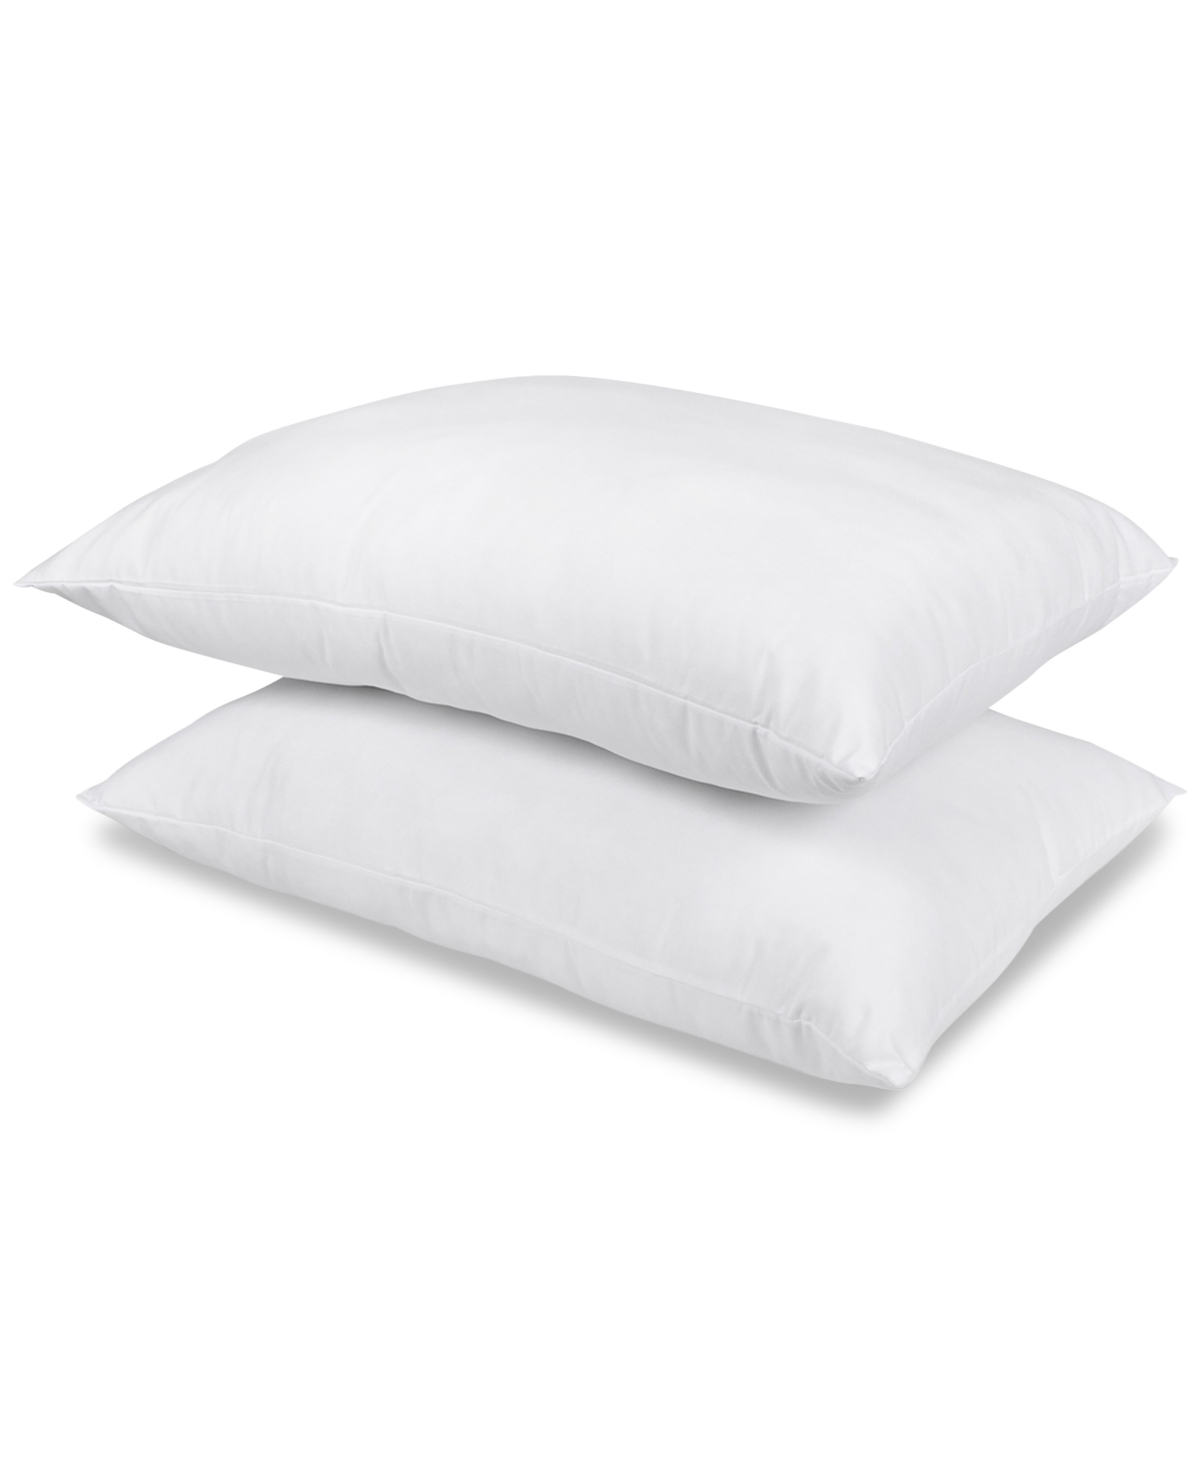 Charter Club 2-pk. Pillows, Standard/queen, Created For Macy's In White